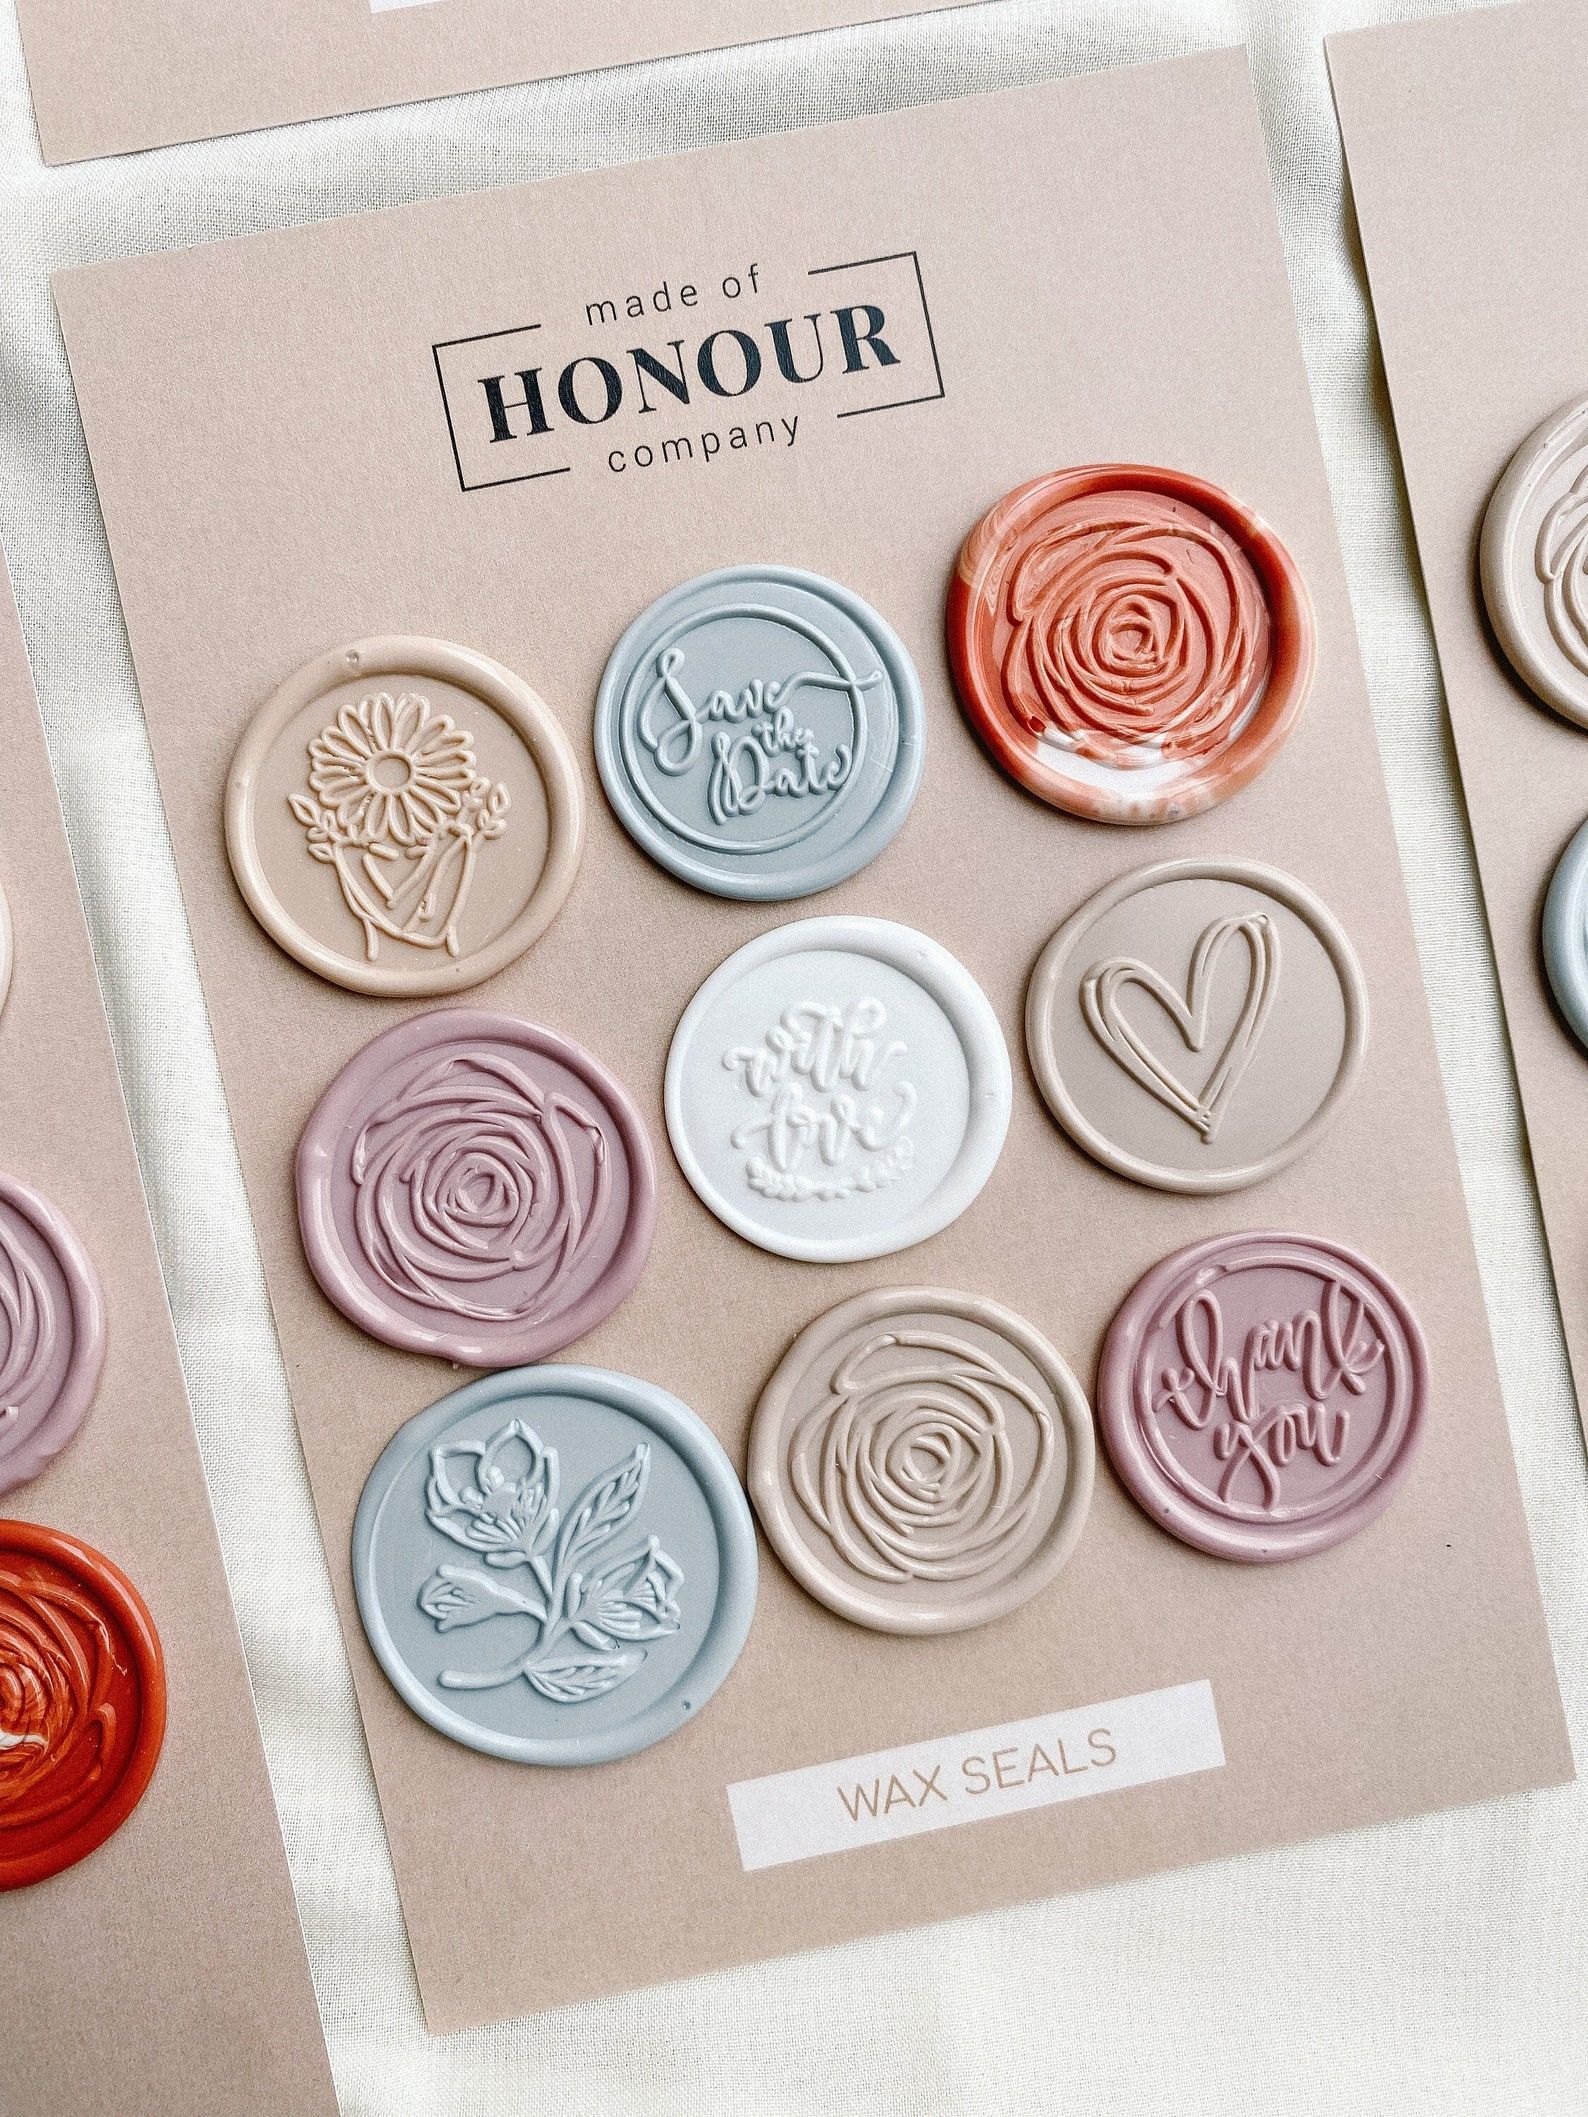 Image of a pack of wax seals with a variety of shapes and colors, including many types of flowers. 